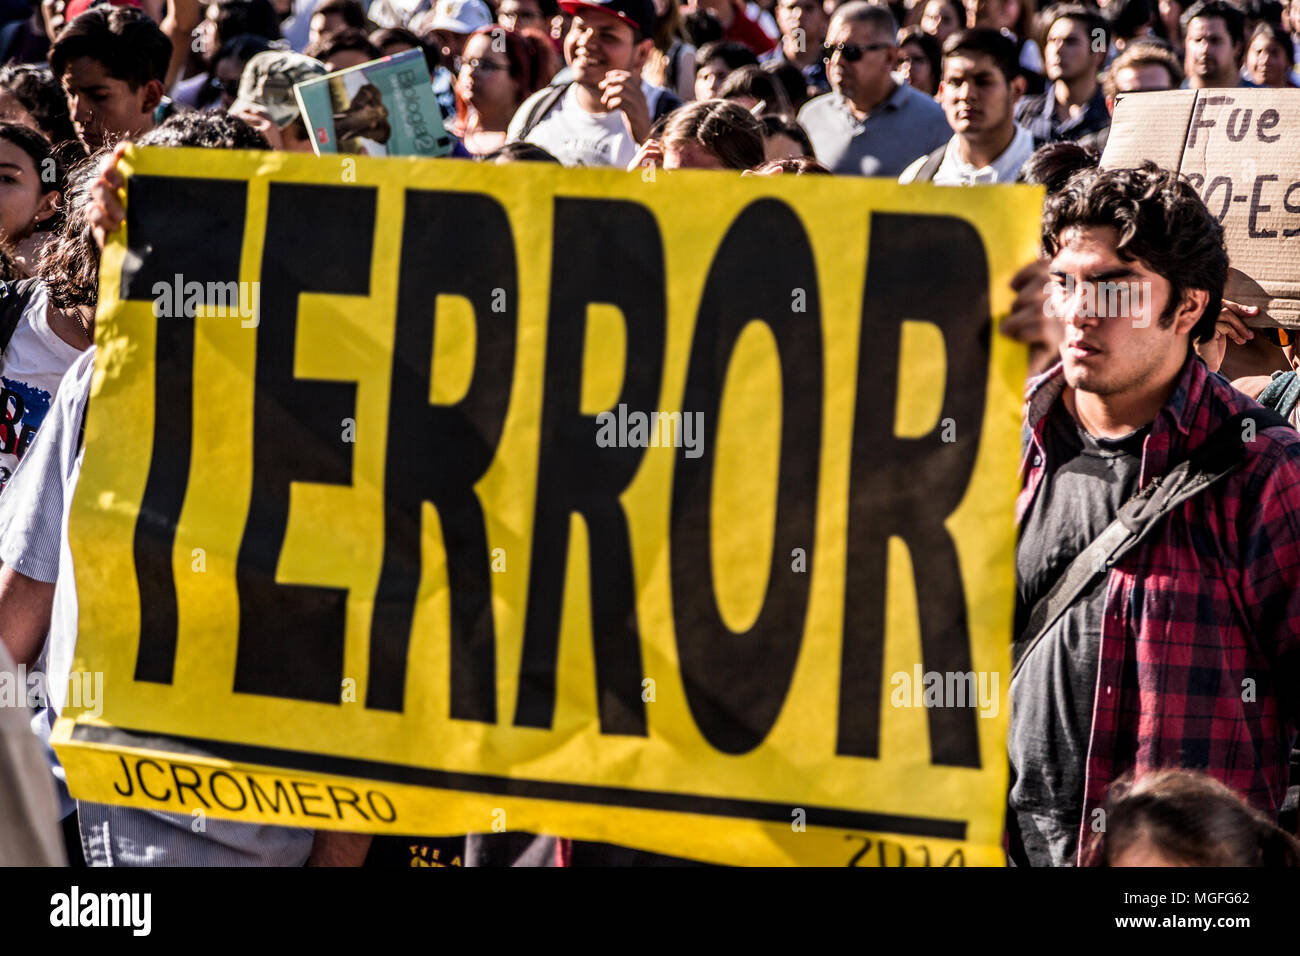 26 April 2018, Mexico, Guadalajara: Demonstrators carry a banner which reads 'Terror' during a protest march following the murder of three film students. Mexico is currently experiencing an unprecedented surge in violence, marking 2017 the bloodiest year in the country's recent history with more than 29,000 homicides and around 30,000 people presumed missing. Photo: Toni Rodriguez/dpa Stock Photo